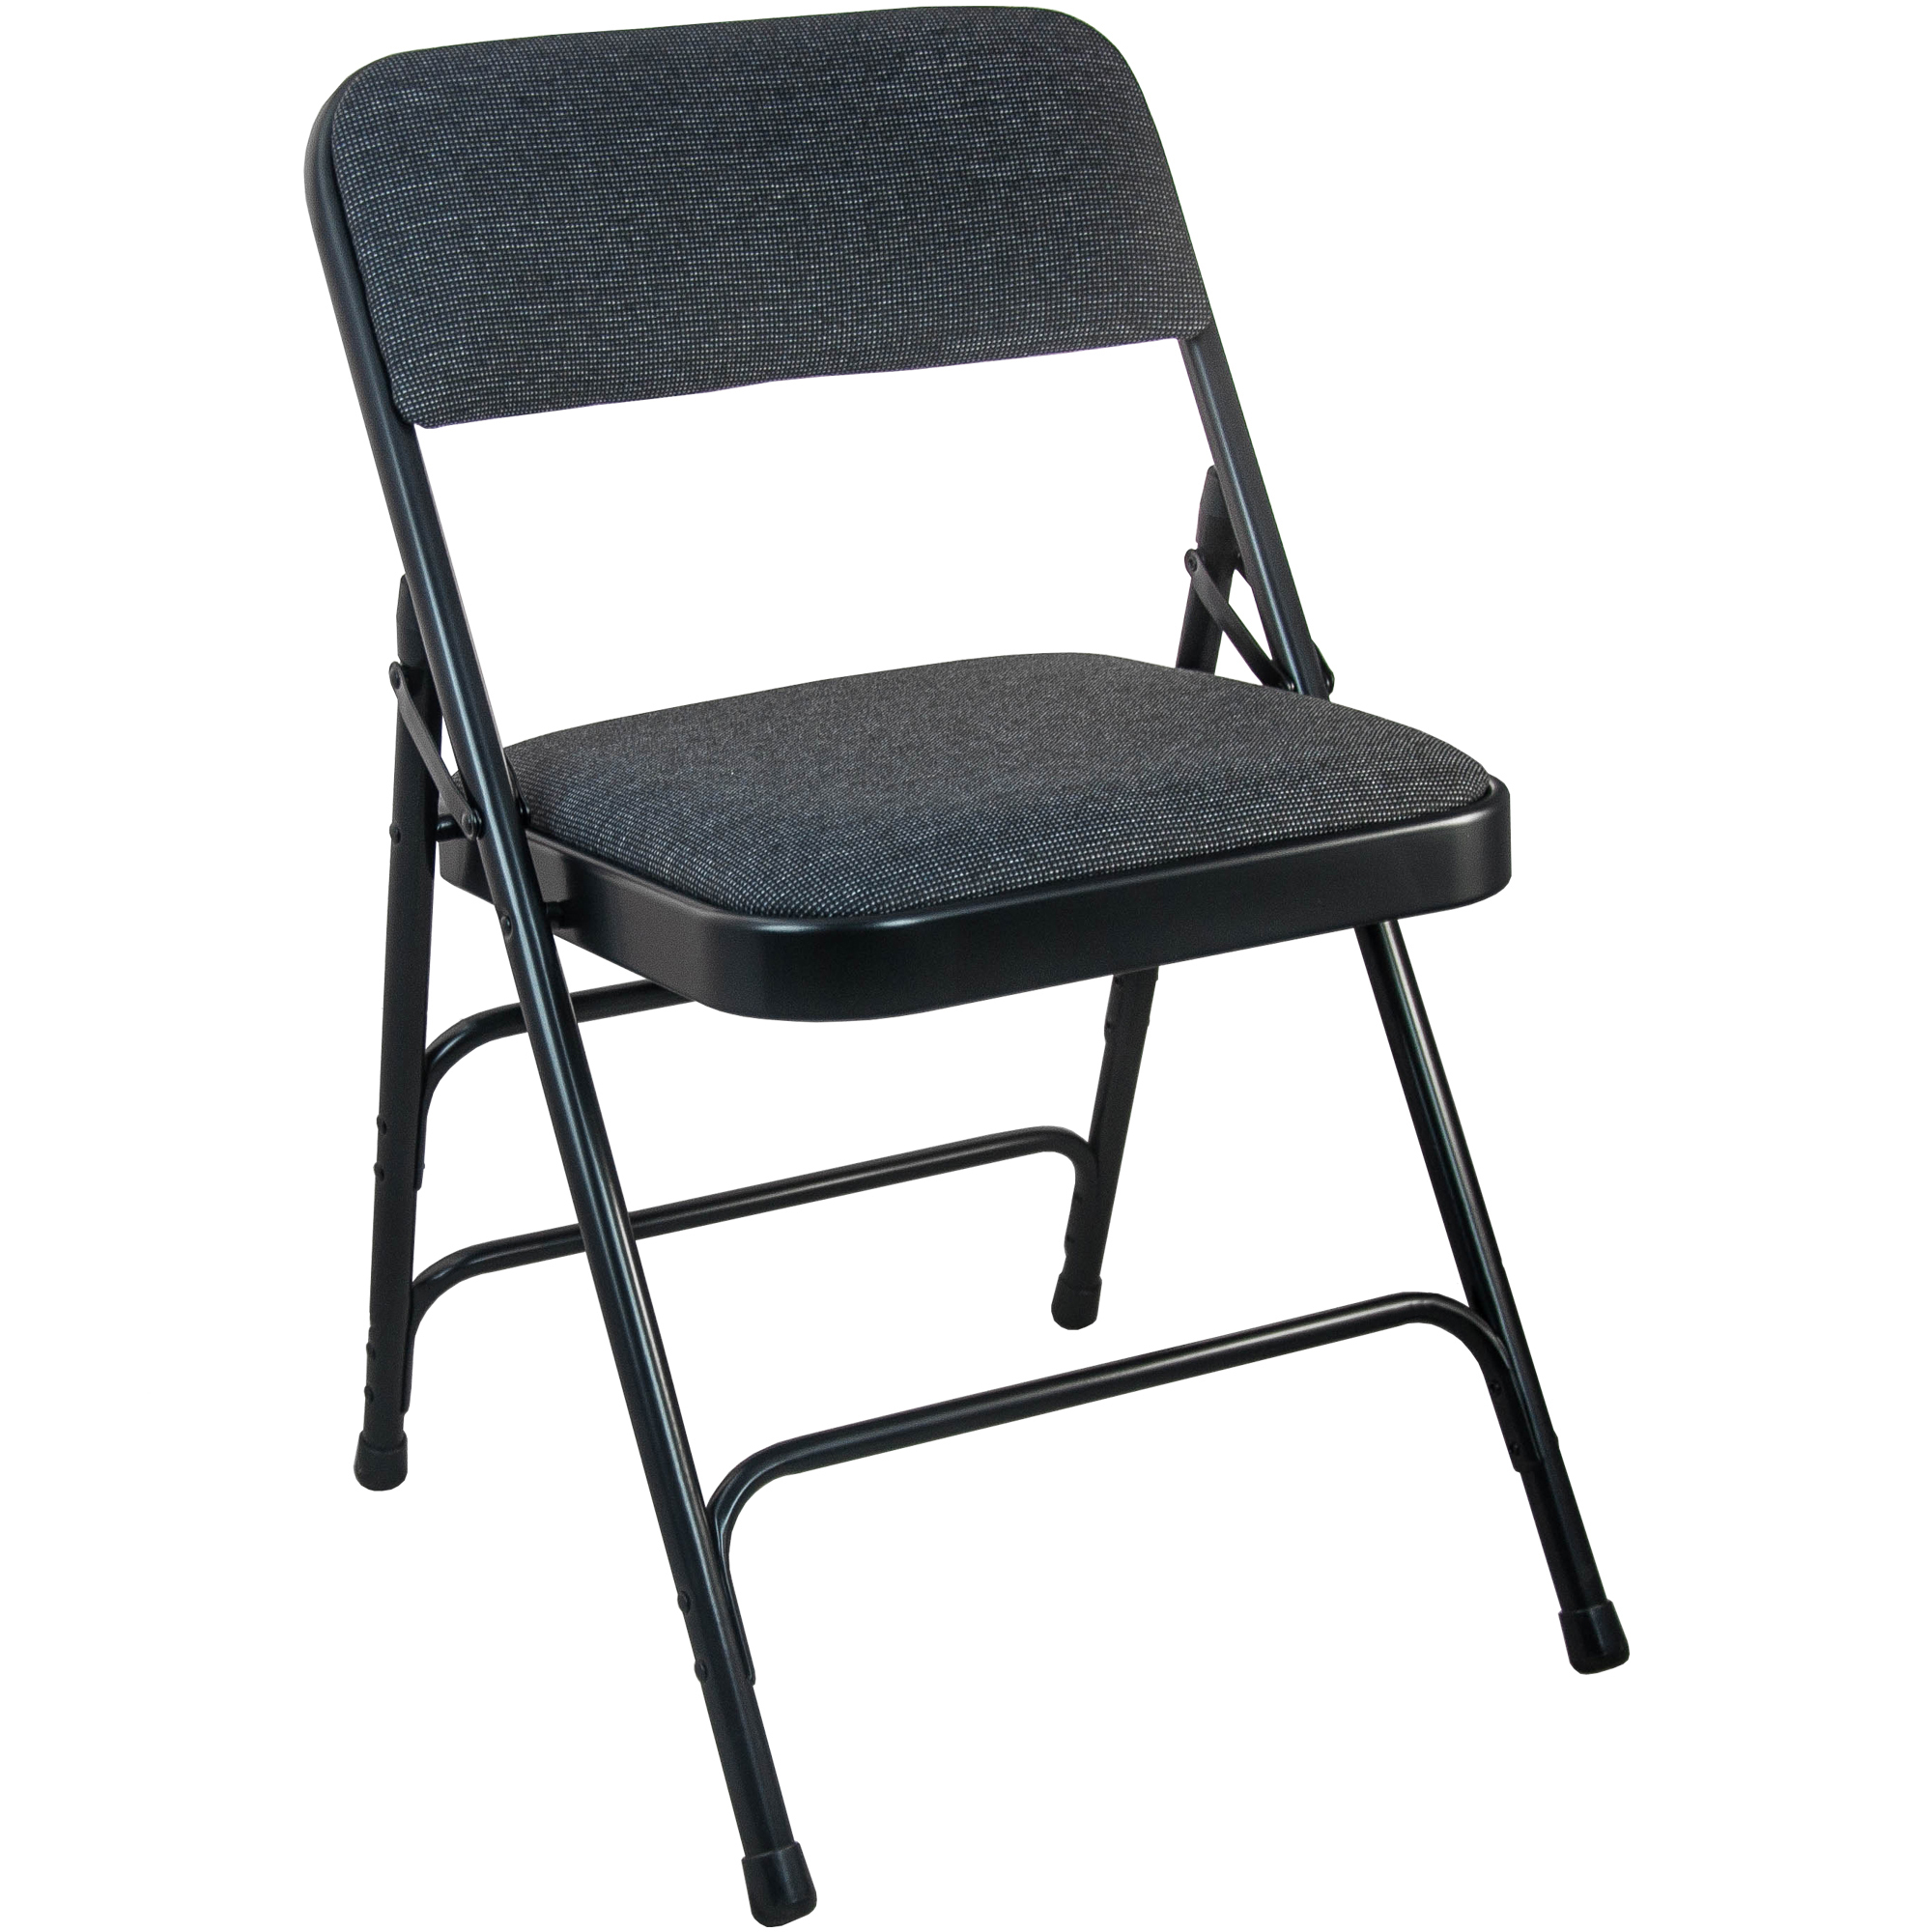 Flash Furniture, Black Padded Metal Folding Chair - 1Inch Fabric Seat, Primary Color Black, Included (qty.) 1, Model DPI903FBLKBLK